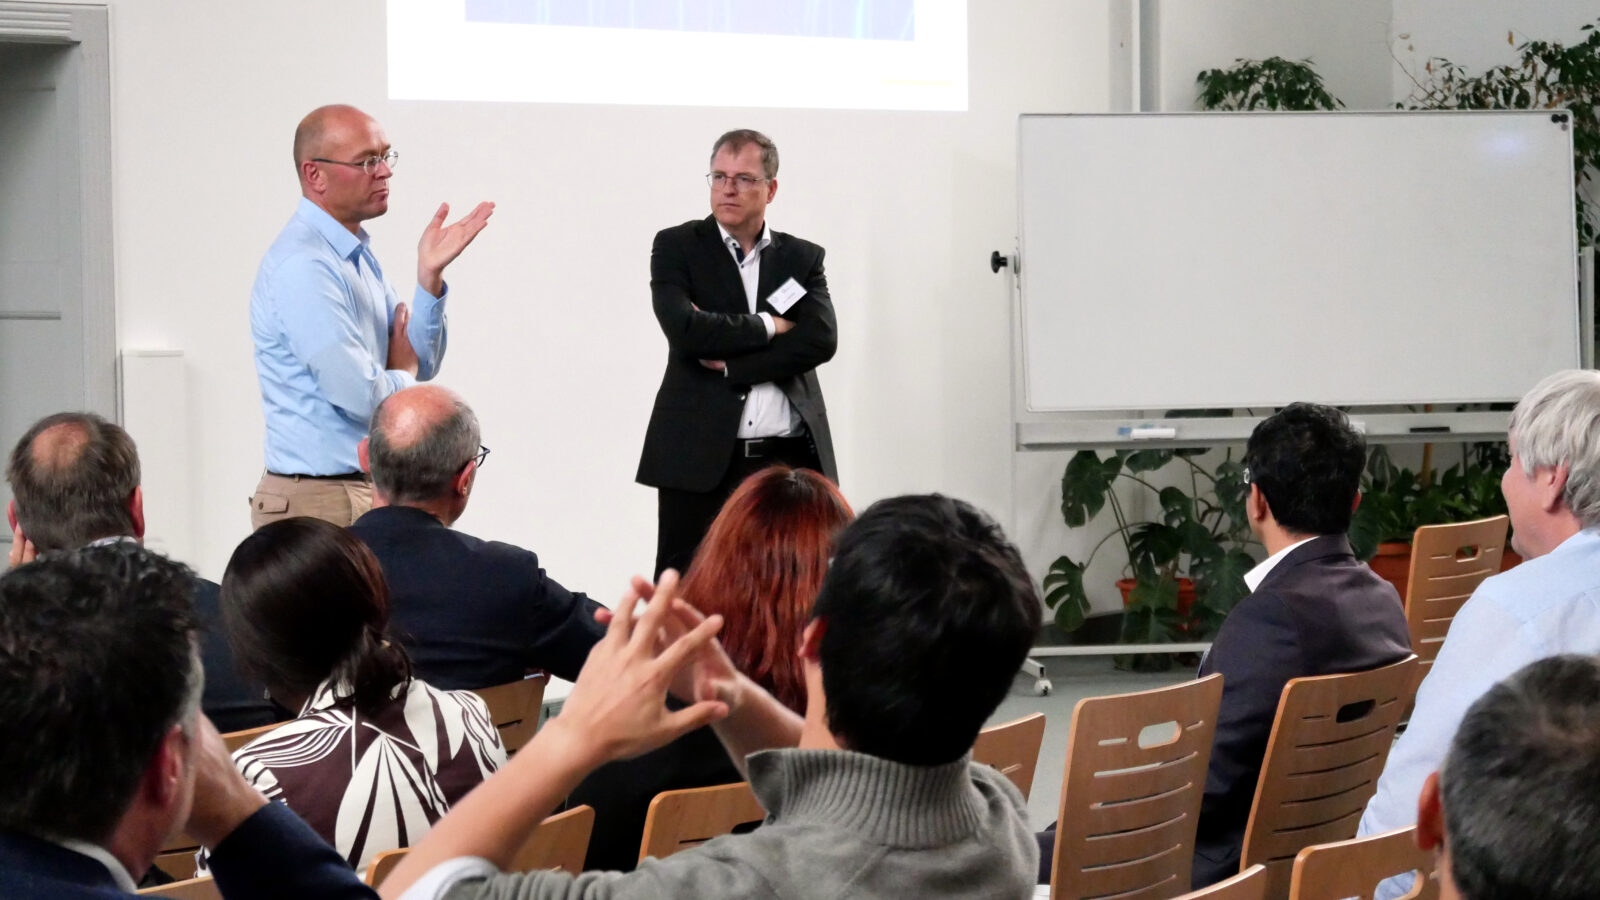 Lutz Hofmann and Jan Meyer during the speakers session